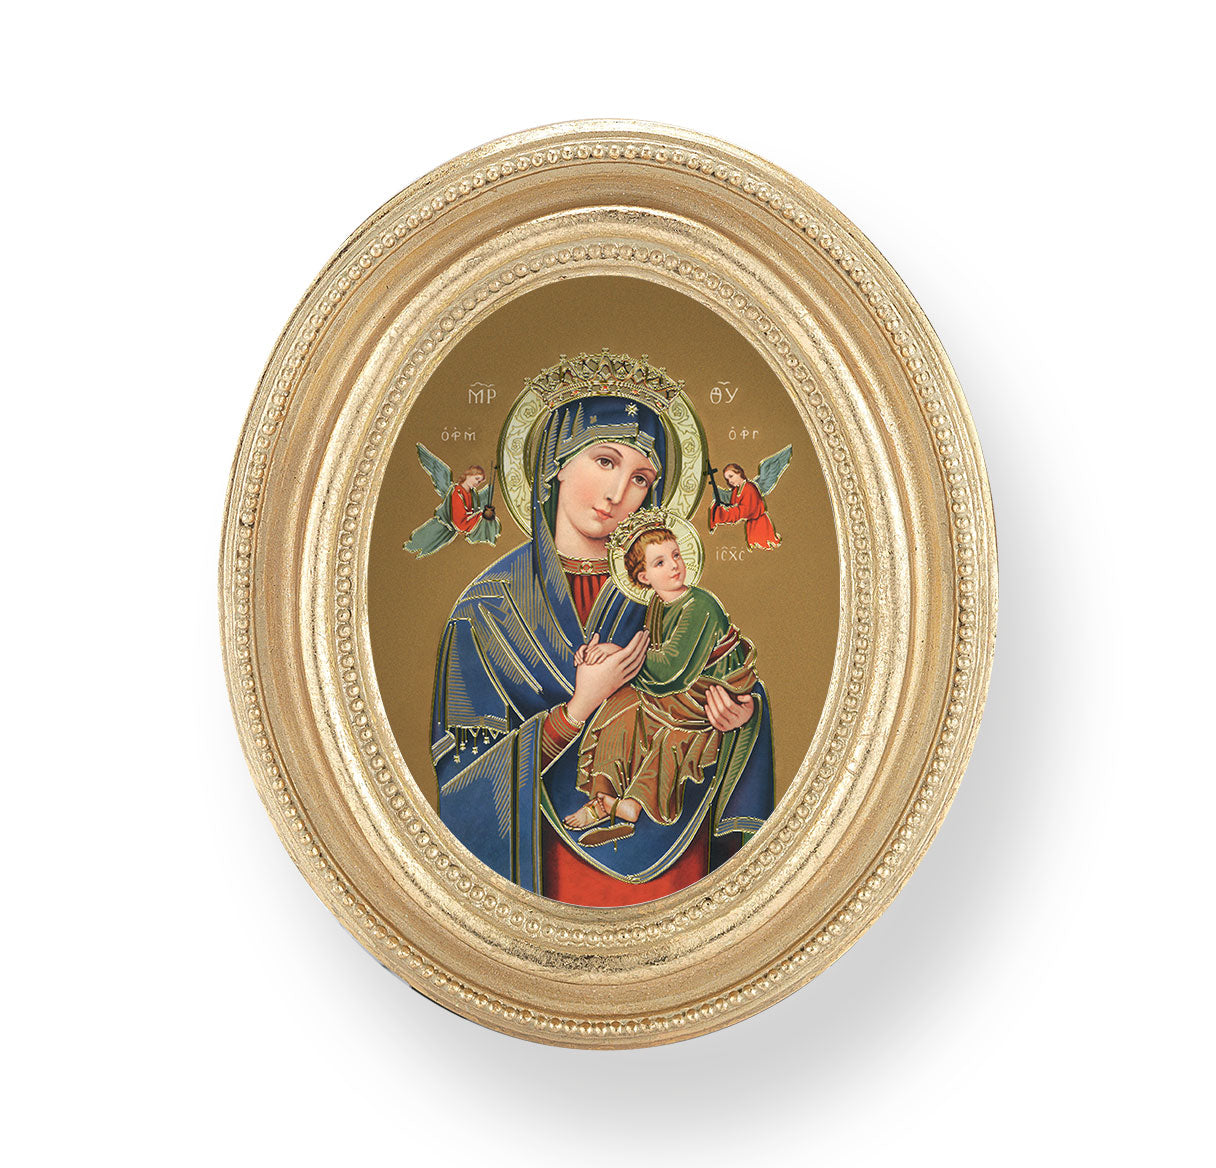 Our Lady of Perpetual Help Gold Framed Print